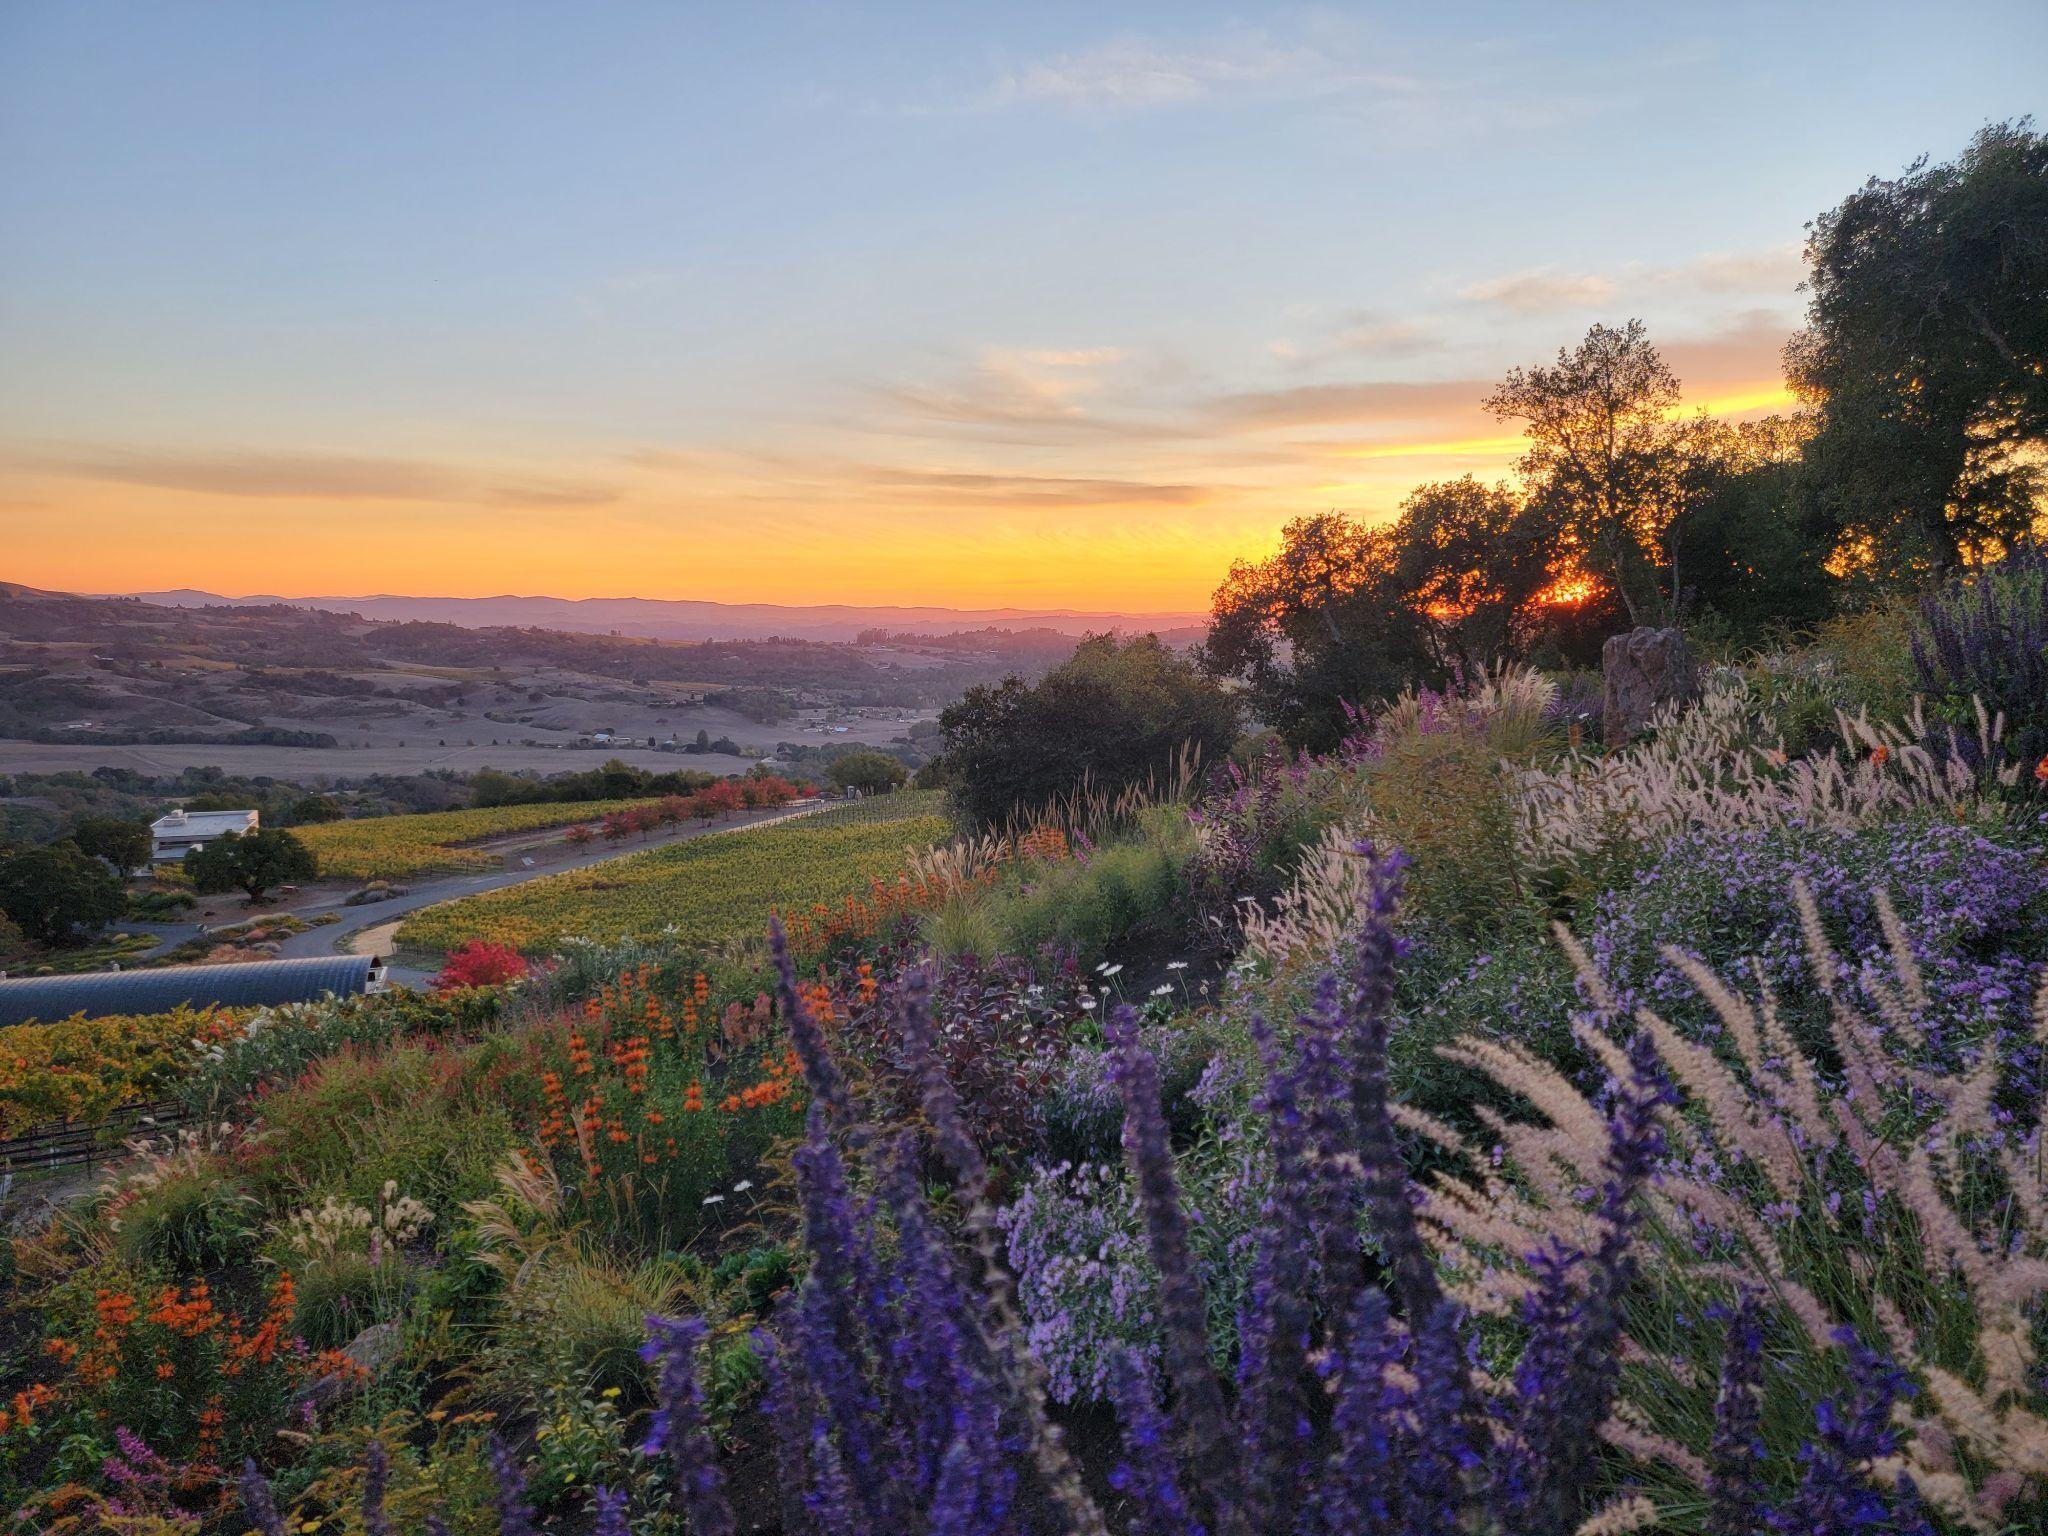 hillside with colorful flowers at a sunset